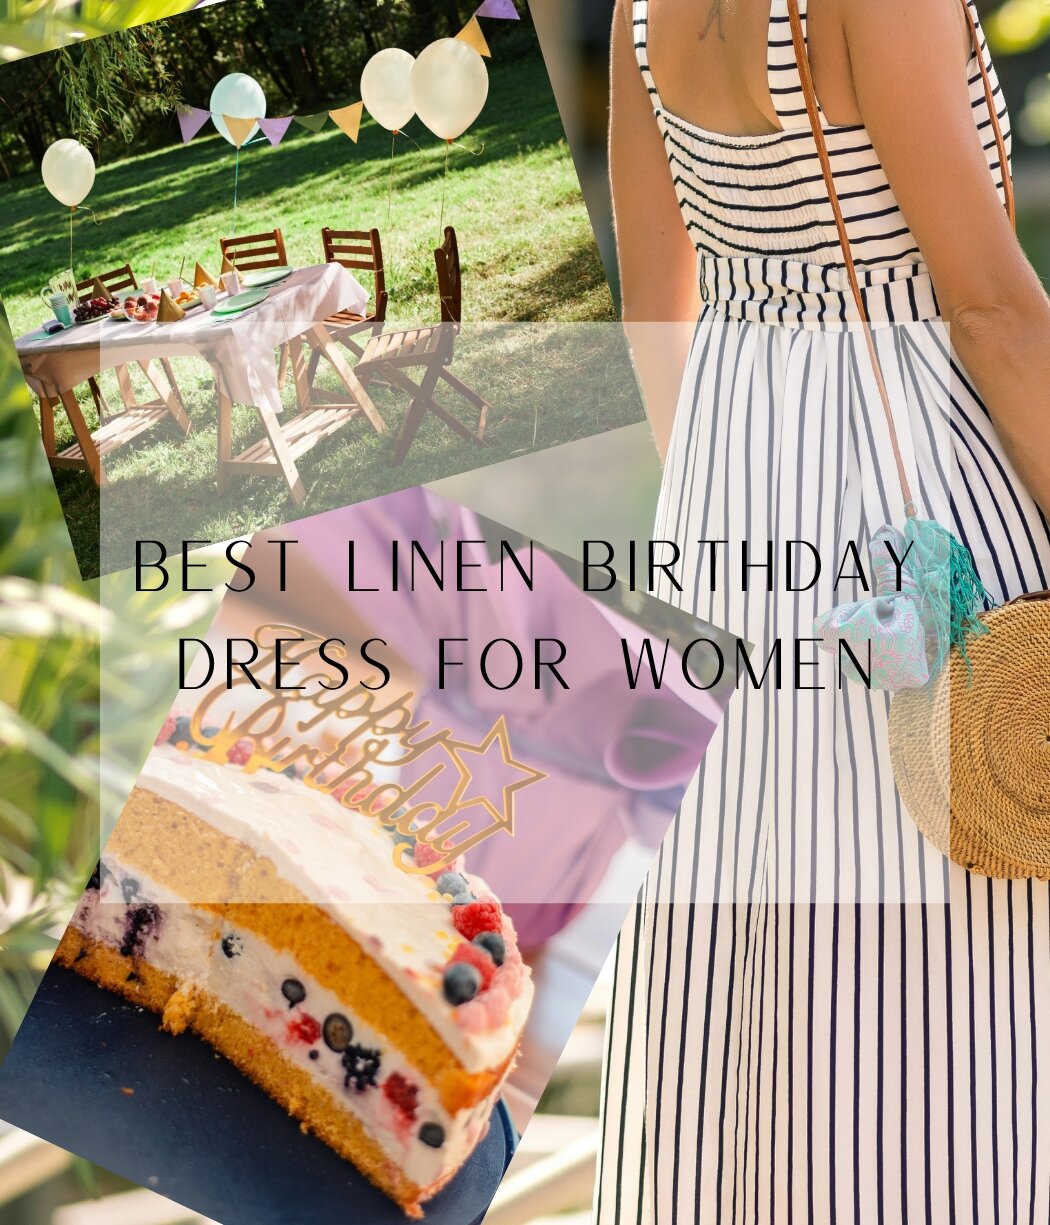 It's My Birthday - 5 Dresses To Look The Best On Your Birthday! | Girl  Meets Dress